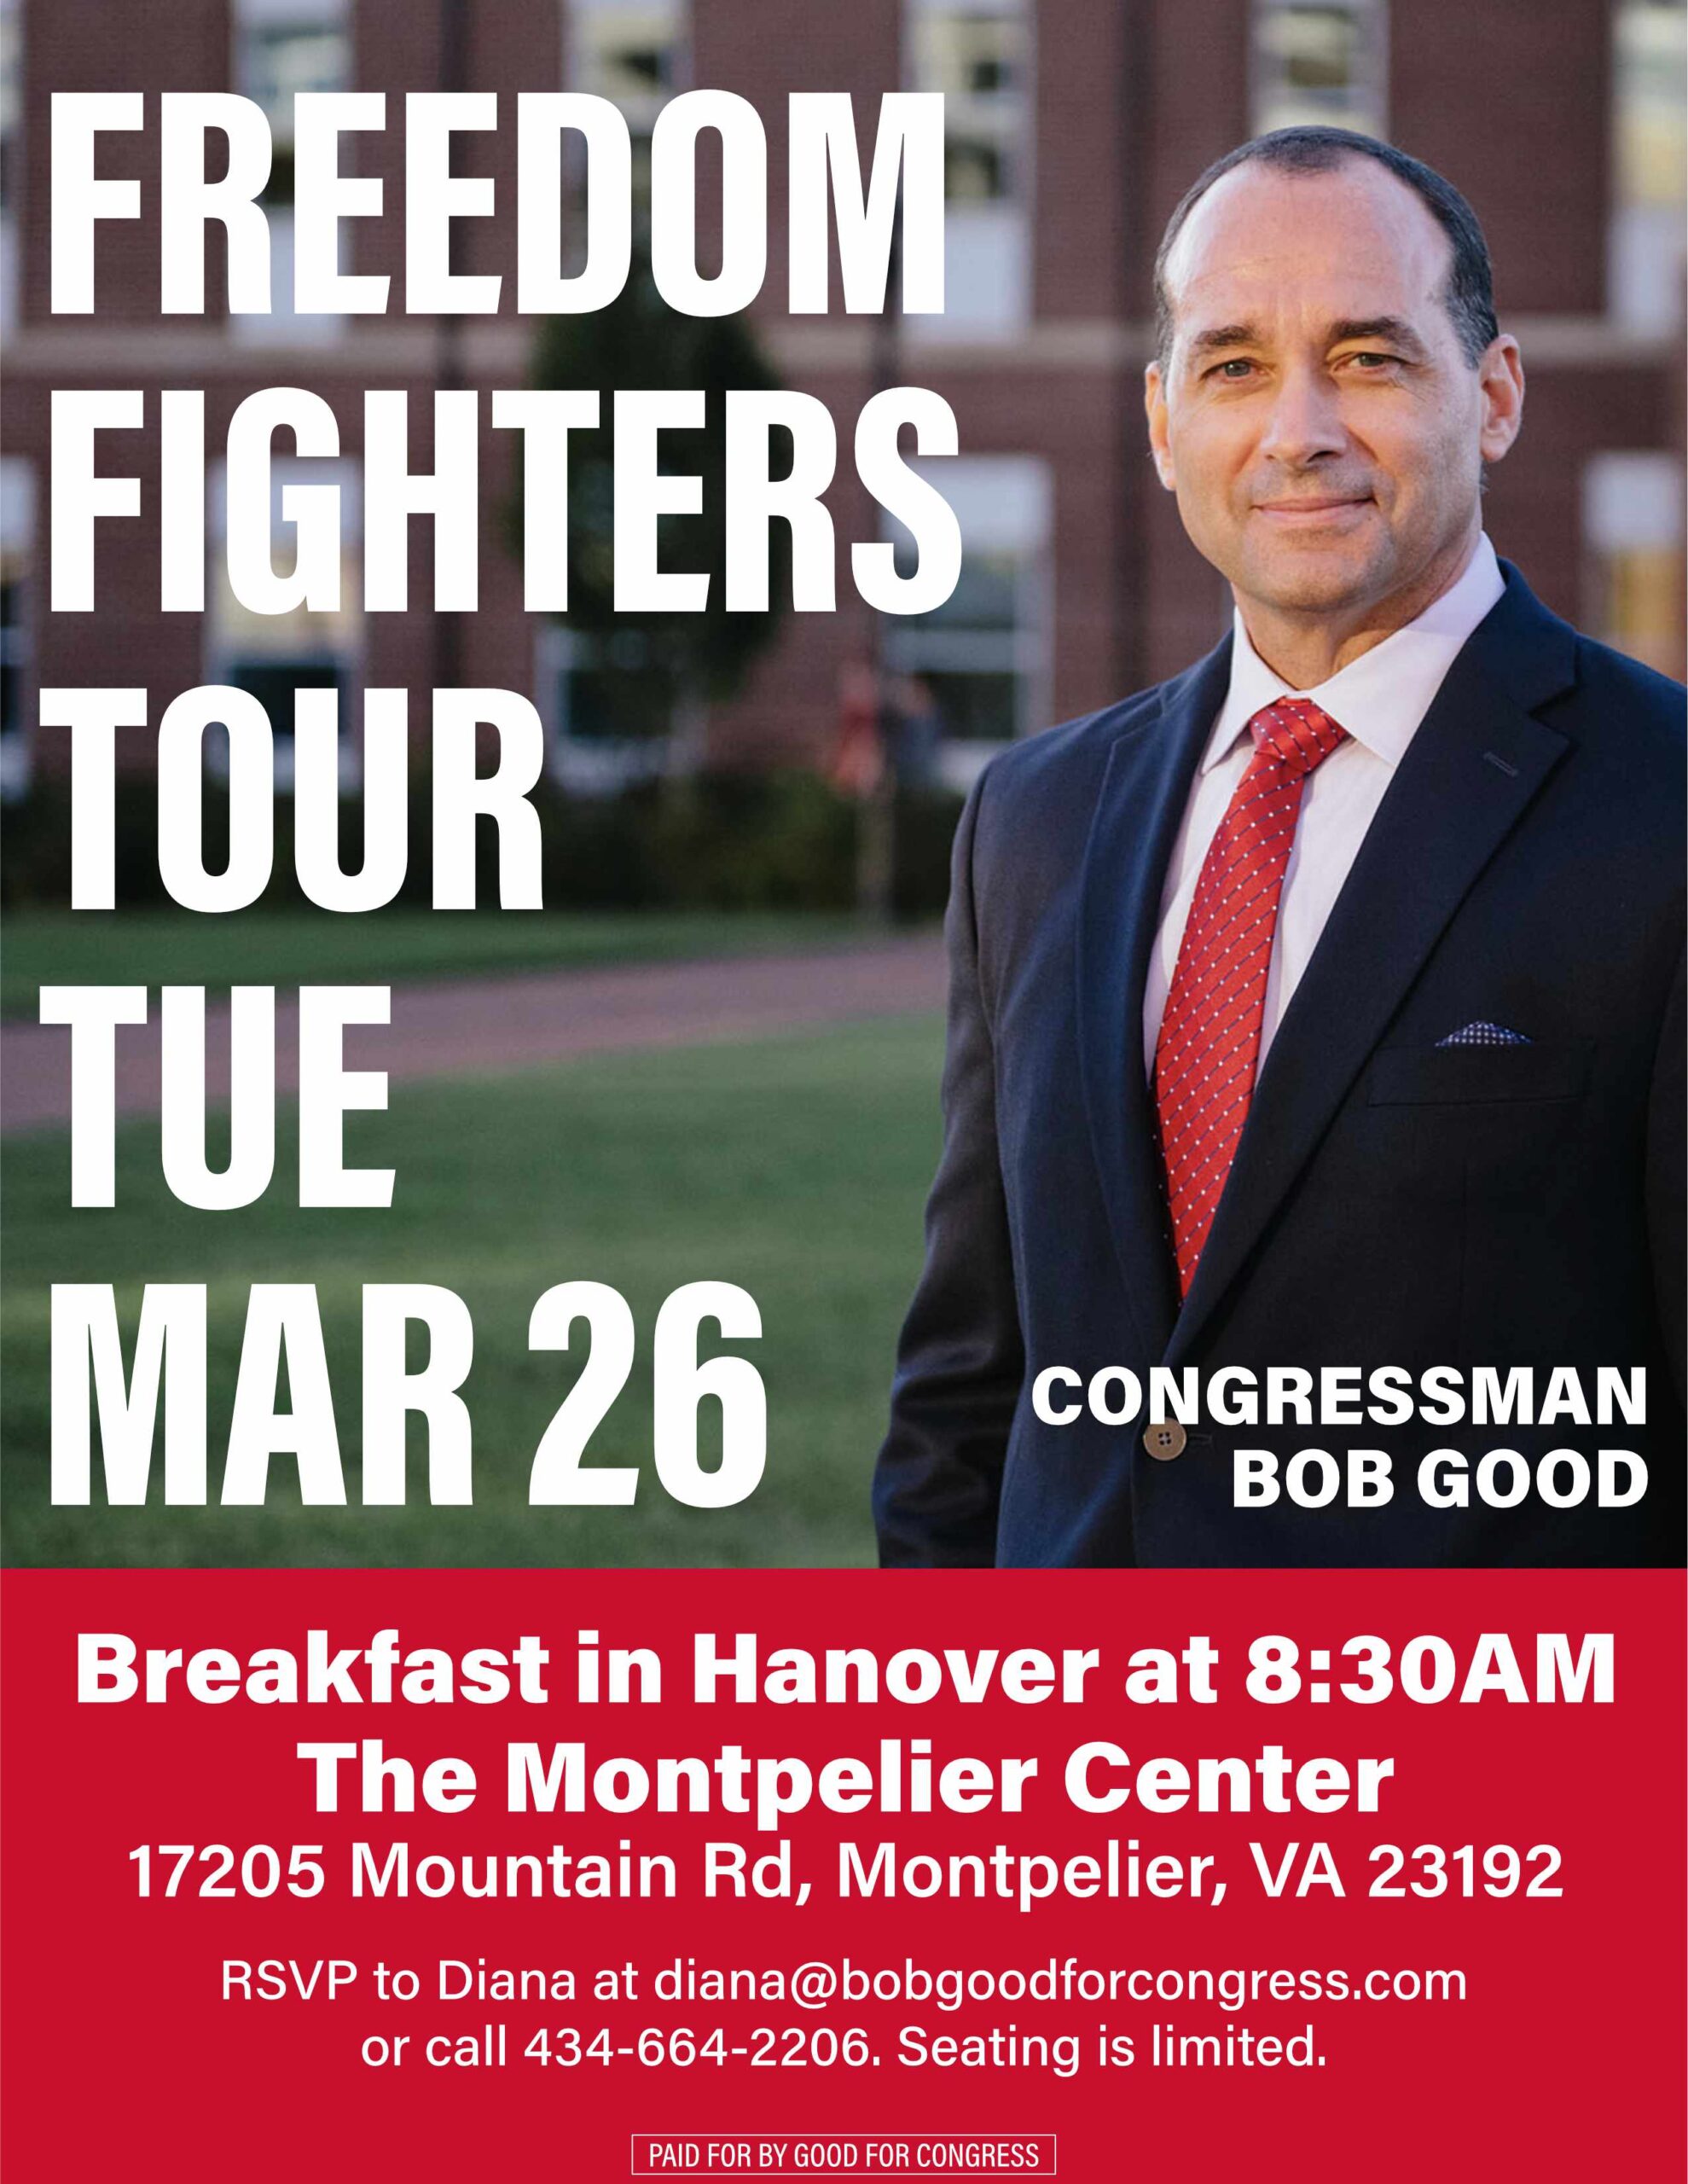 Freedom Fighters Tour March 26